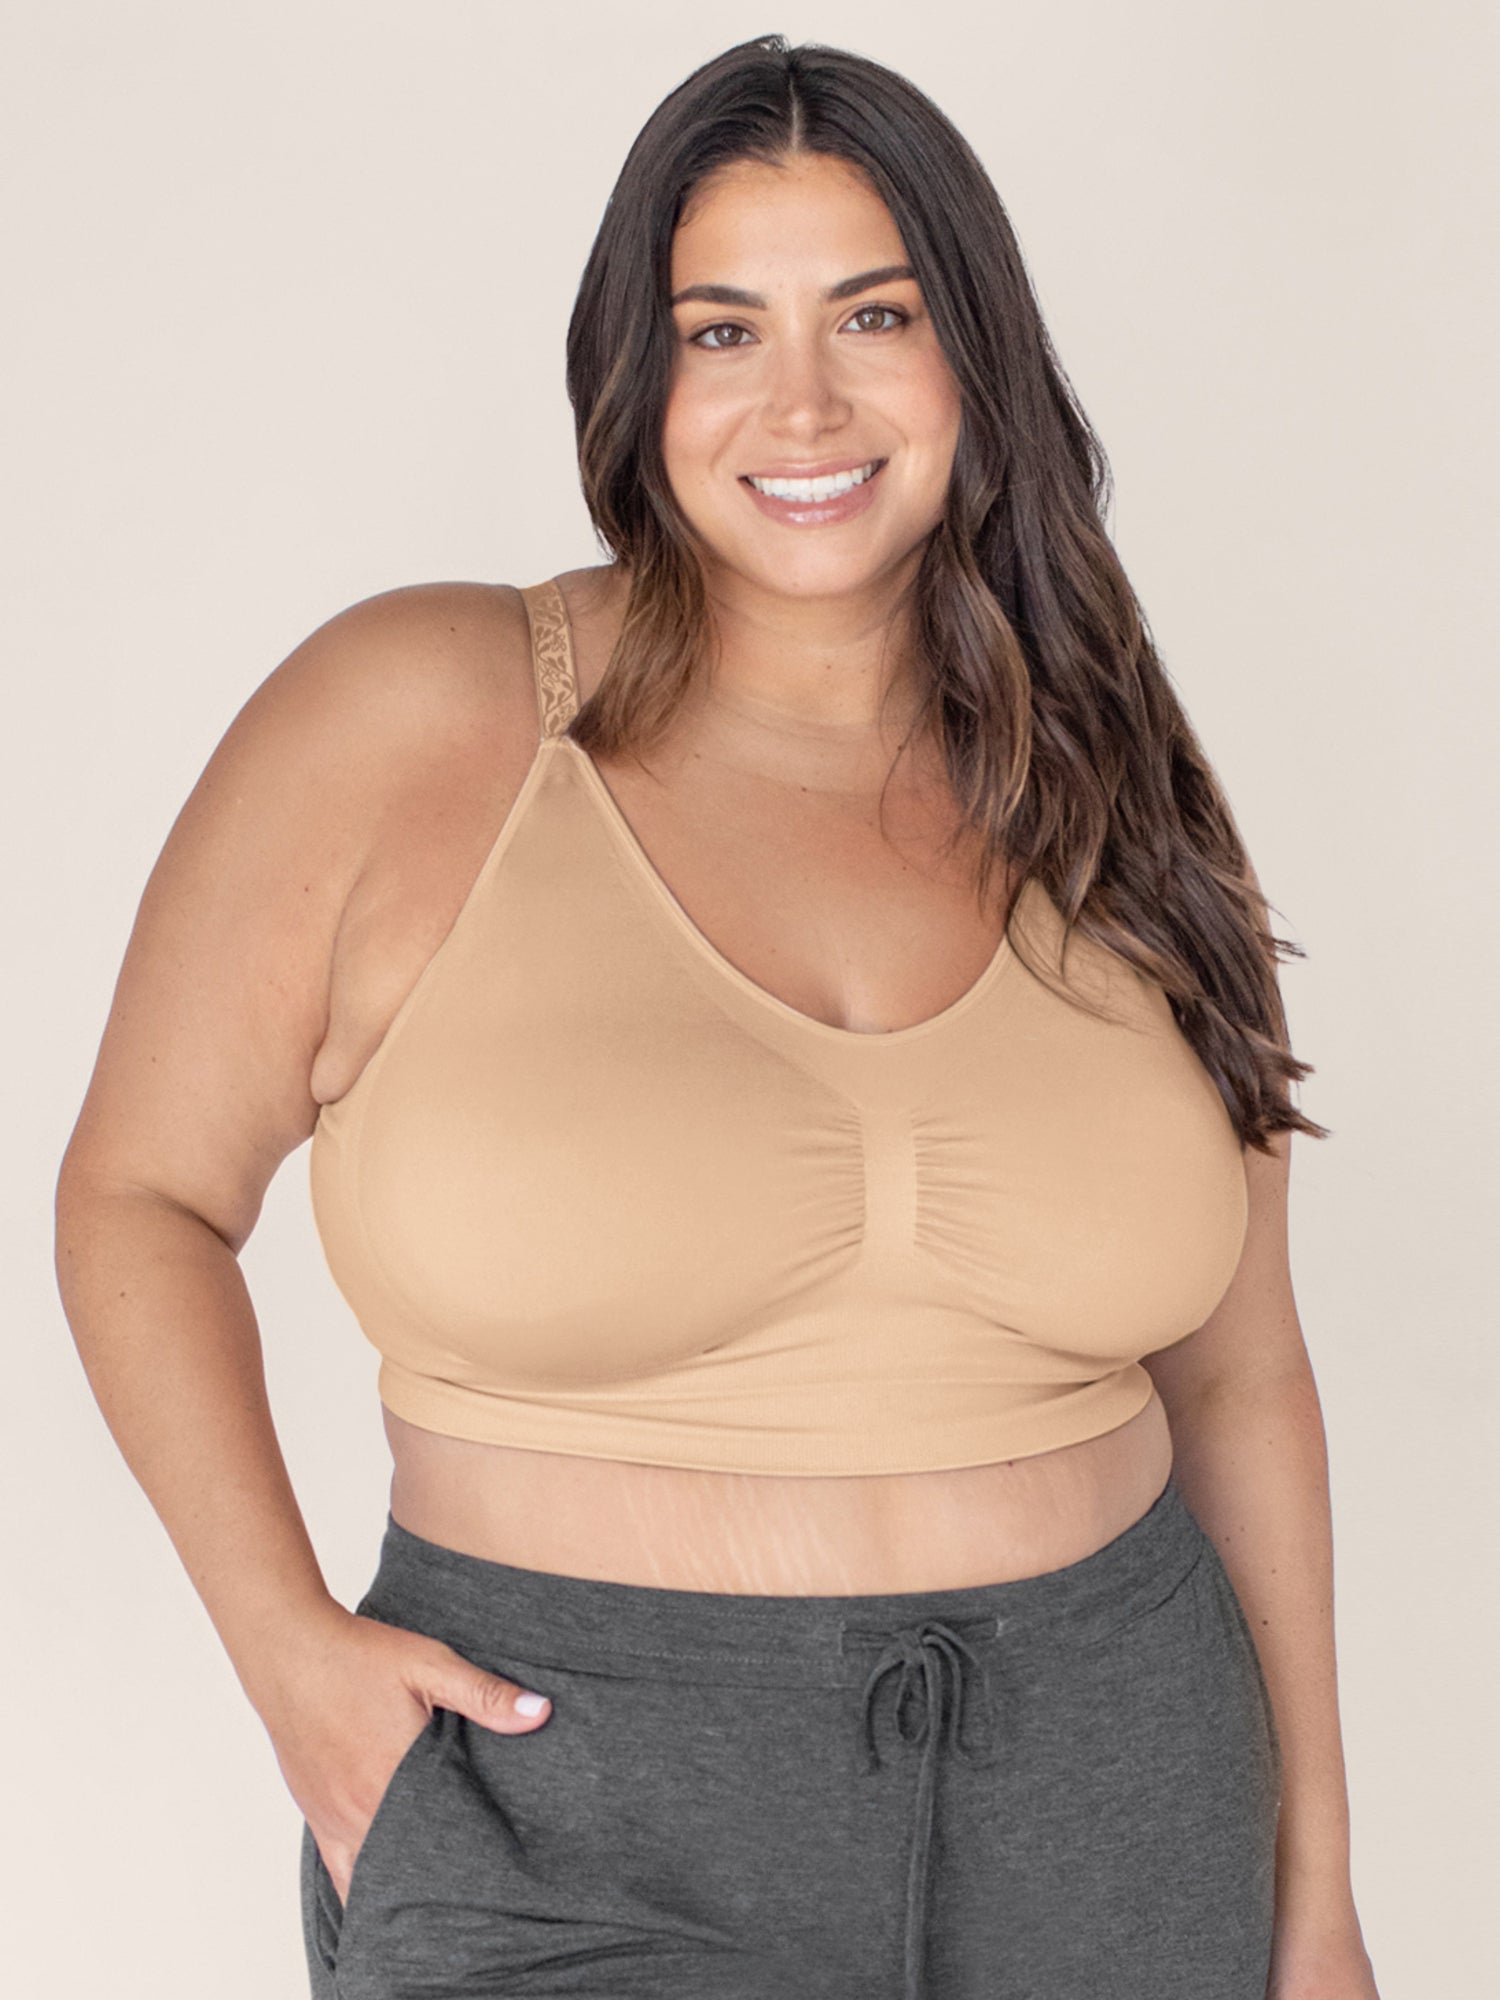 Kindred Bravely Simply Sublime Busty Maternity & Nursing Tank with Built-in  Bra  Nursing Cami for F, G, H, I Cup (Black, Small-Busty) at   Women's Clothing store